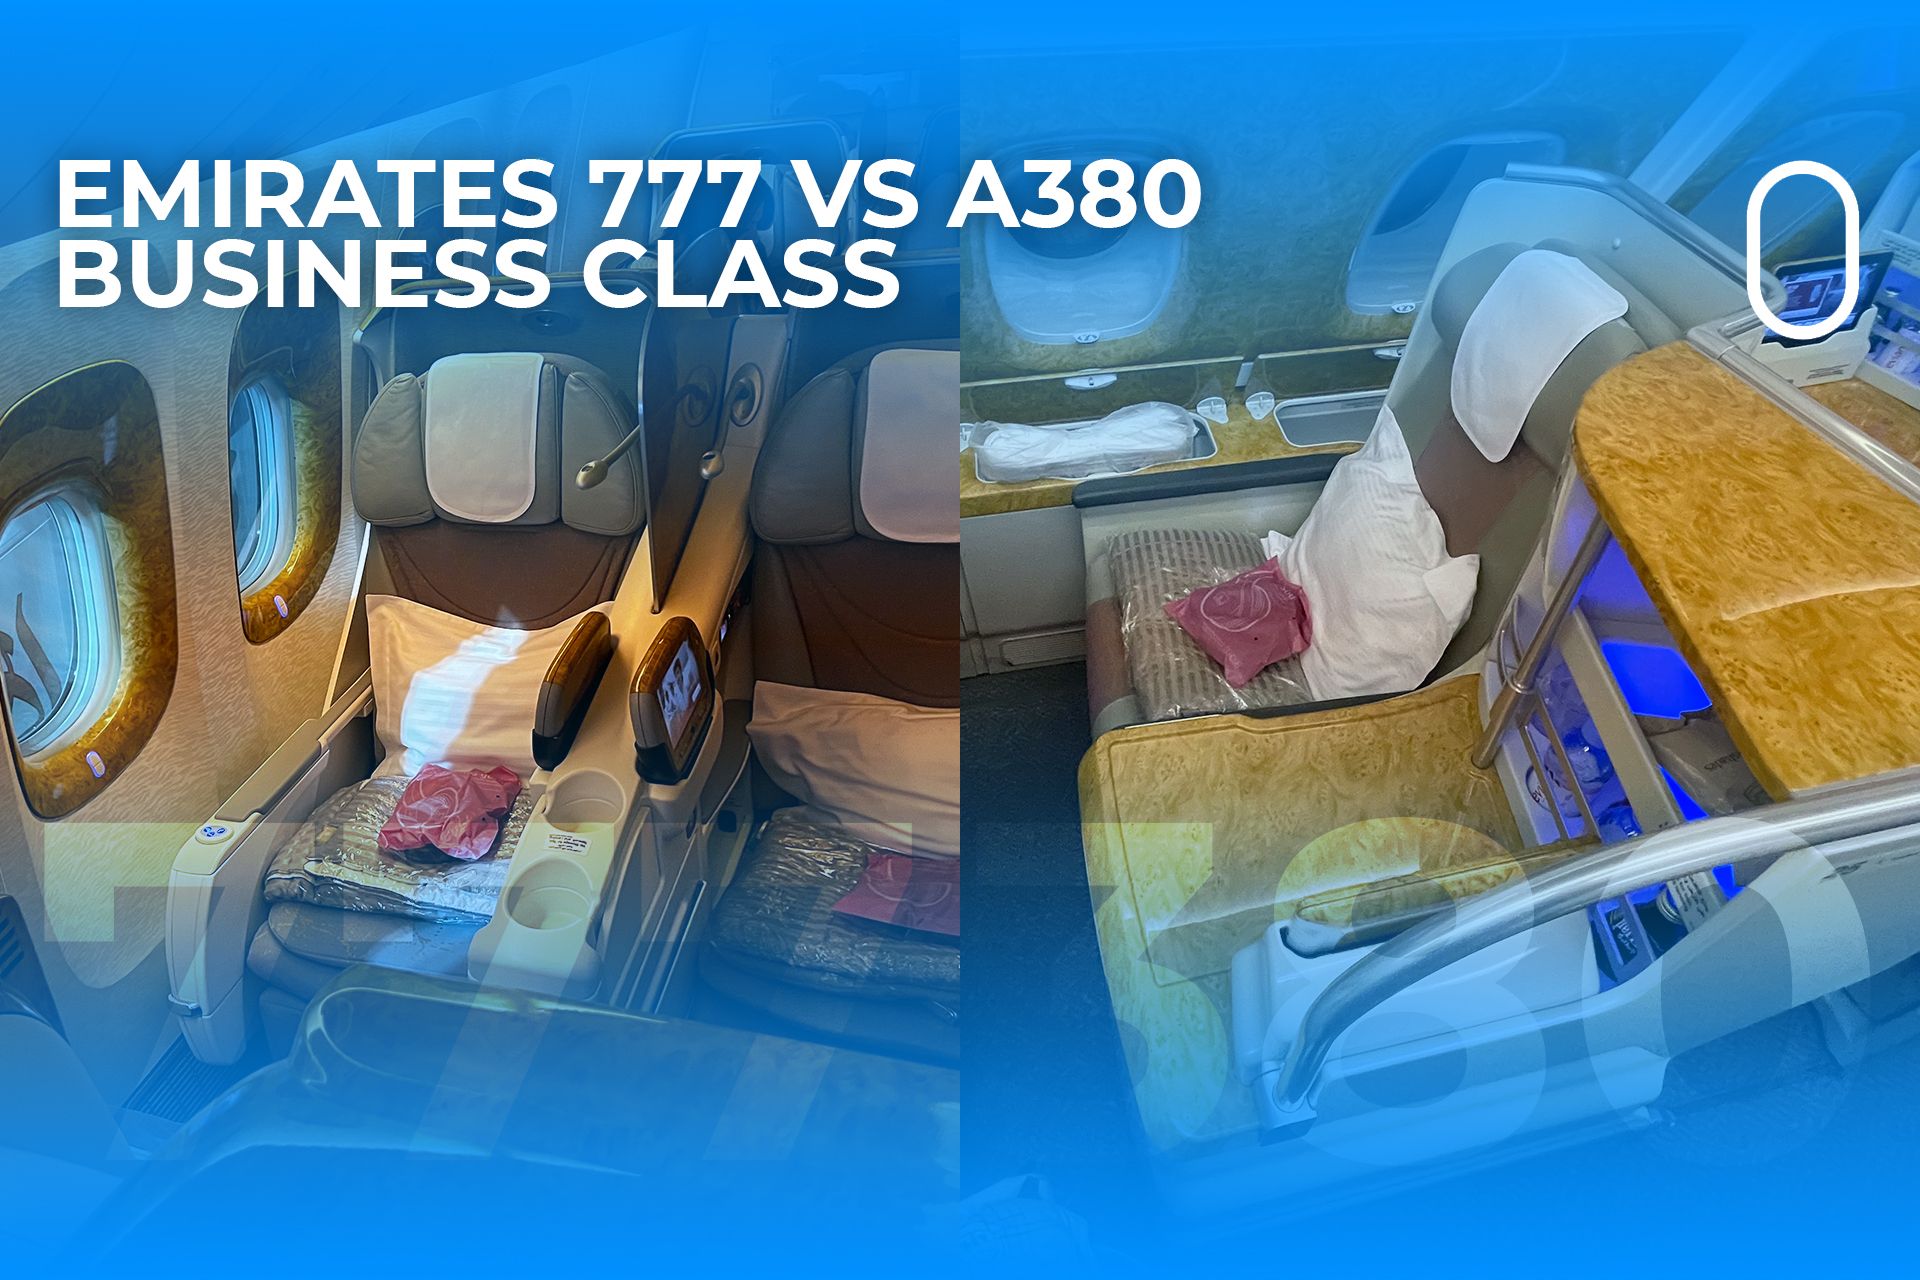 Is Emirates business class better on A380 or 777?